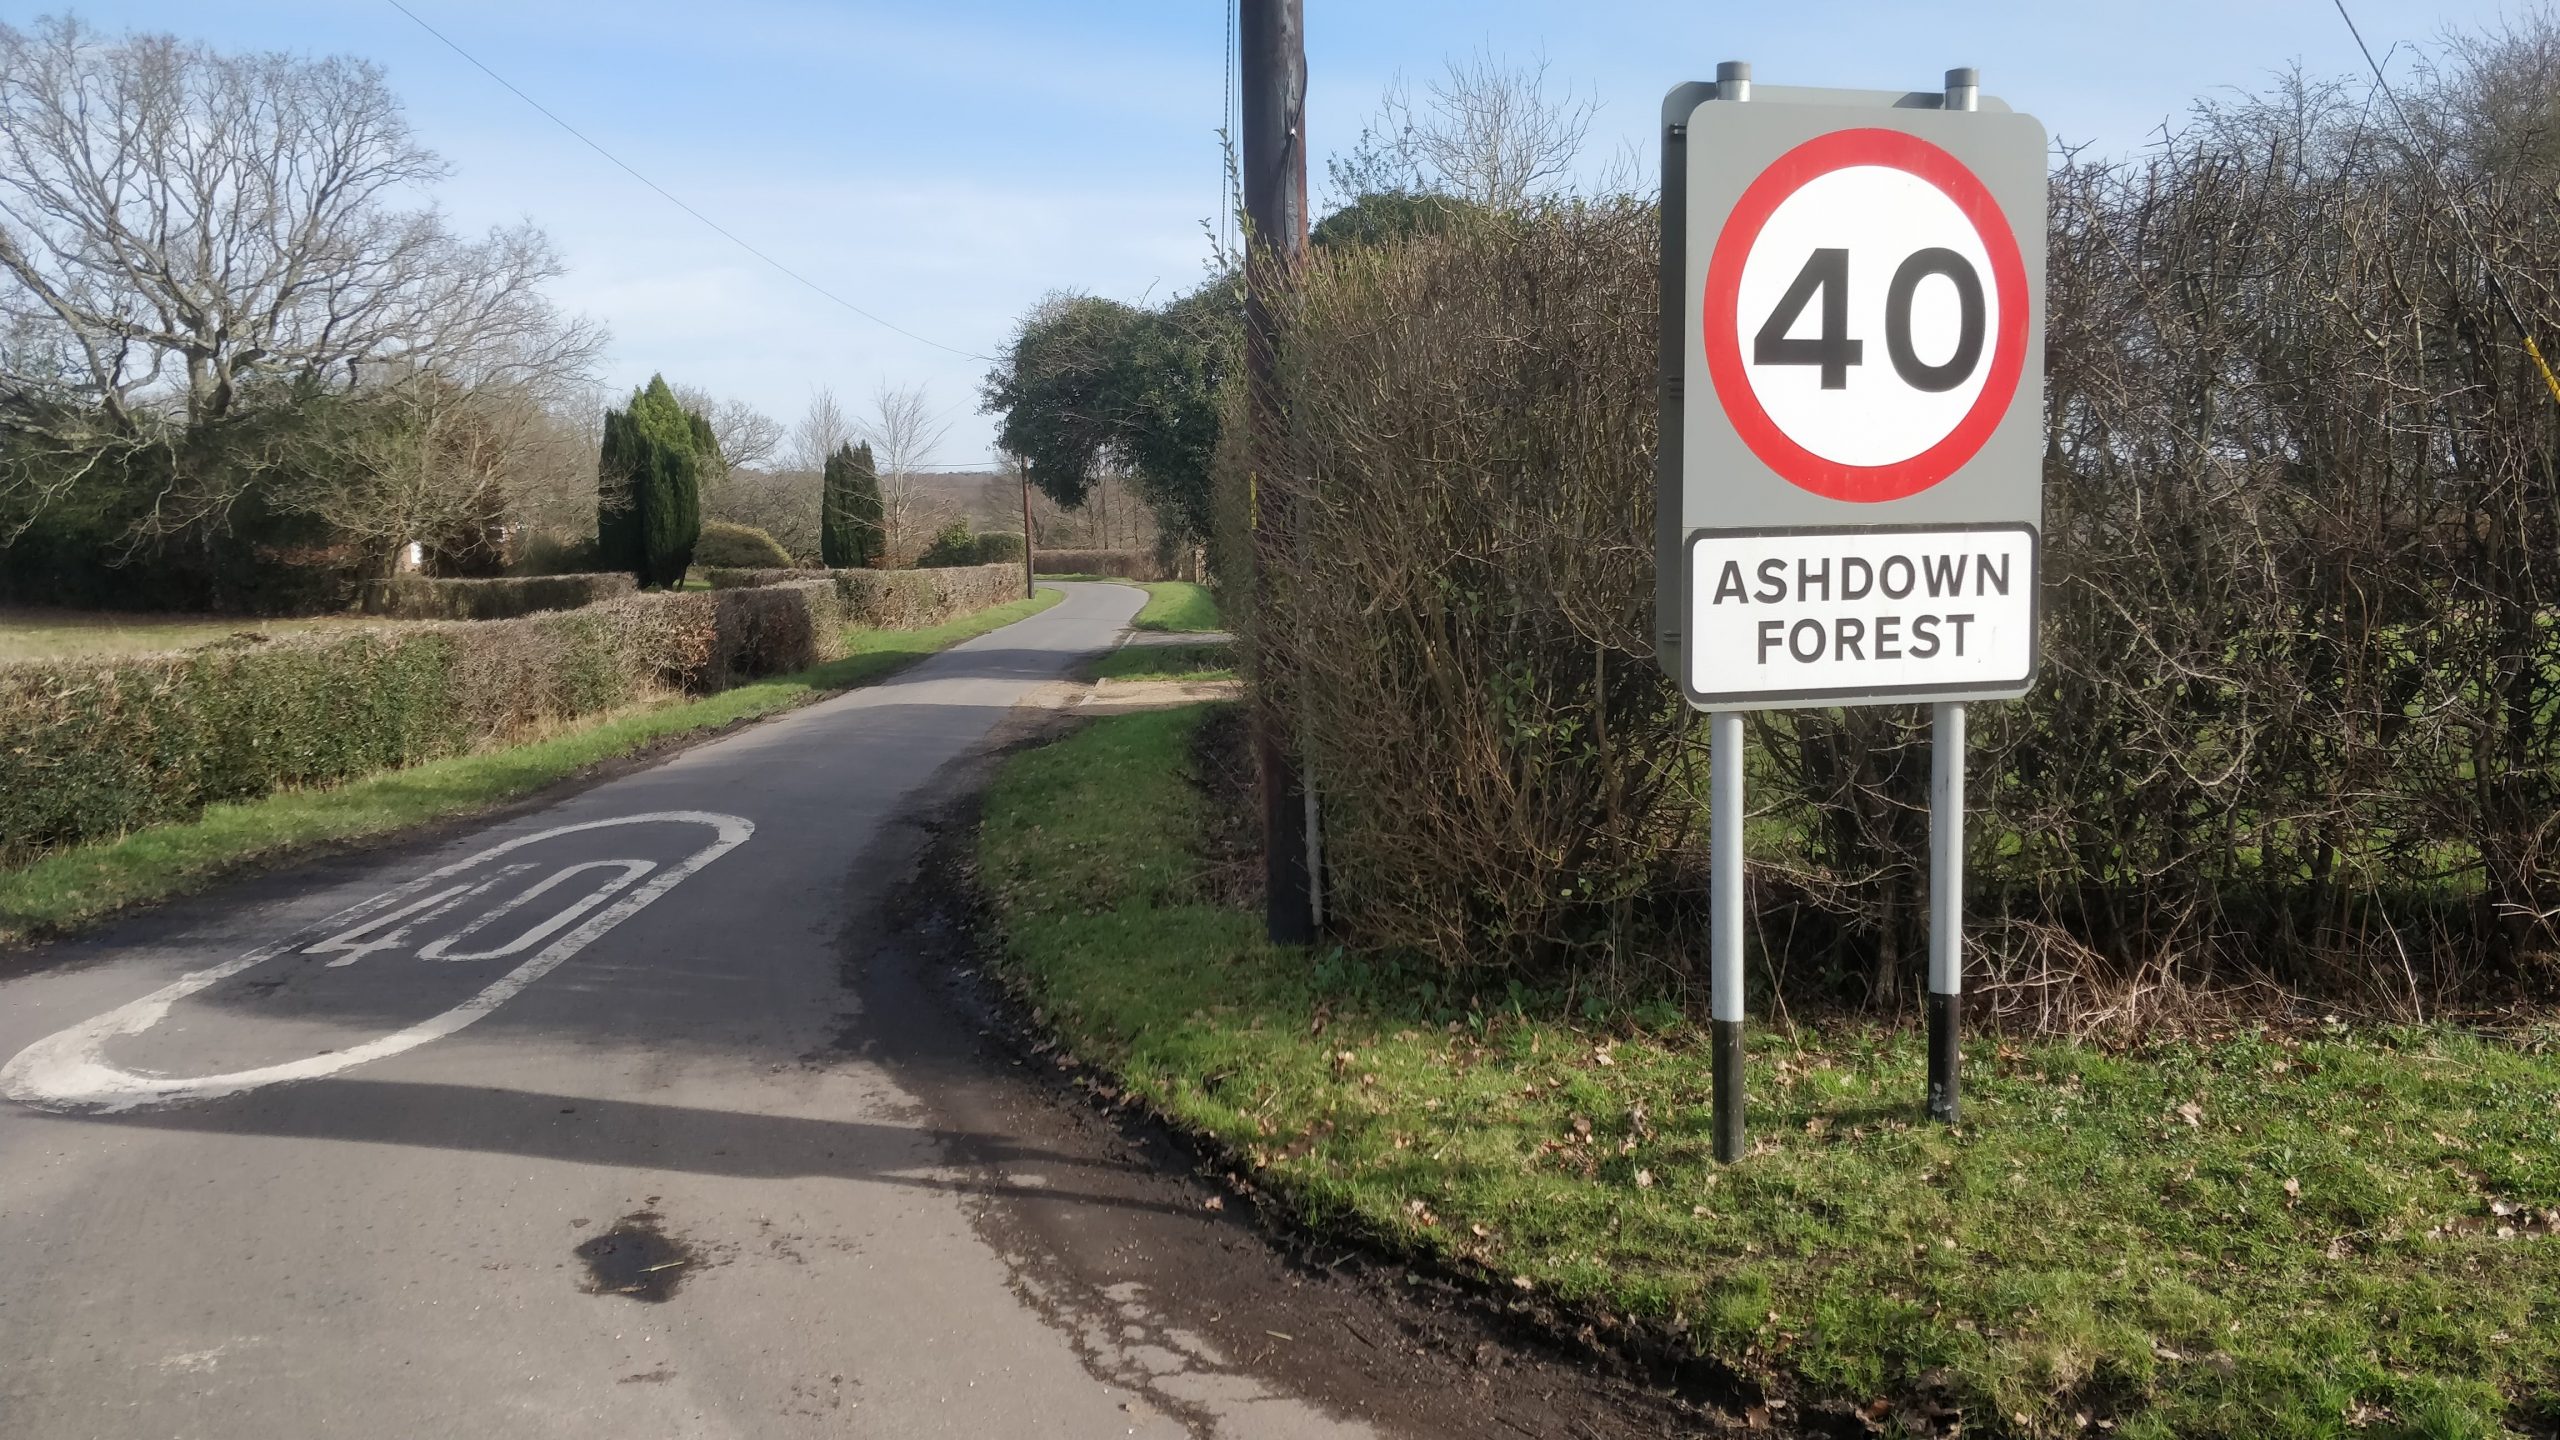 The case for a 40mph speed limit